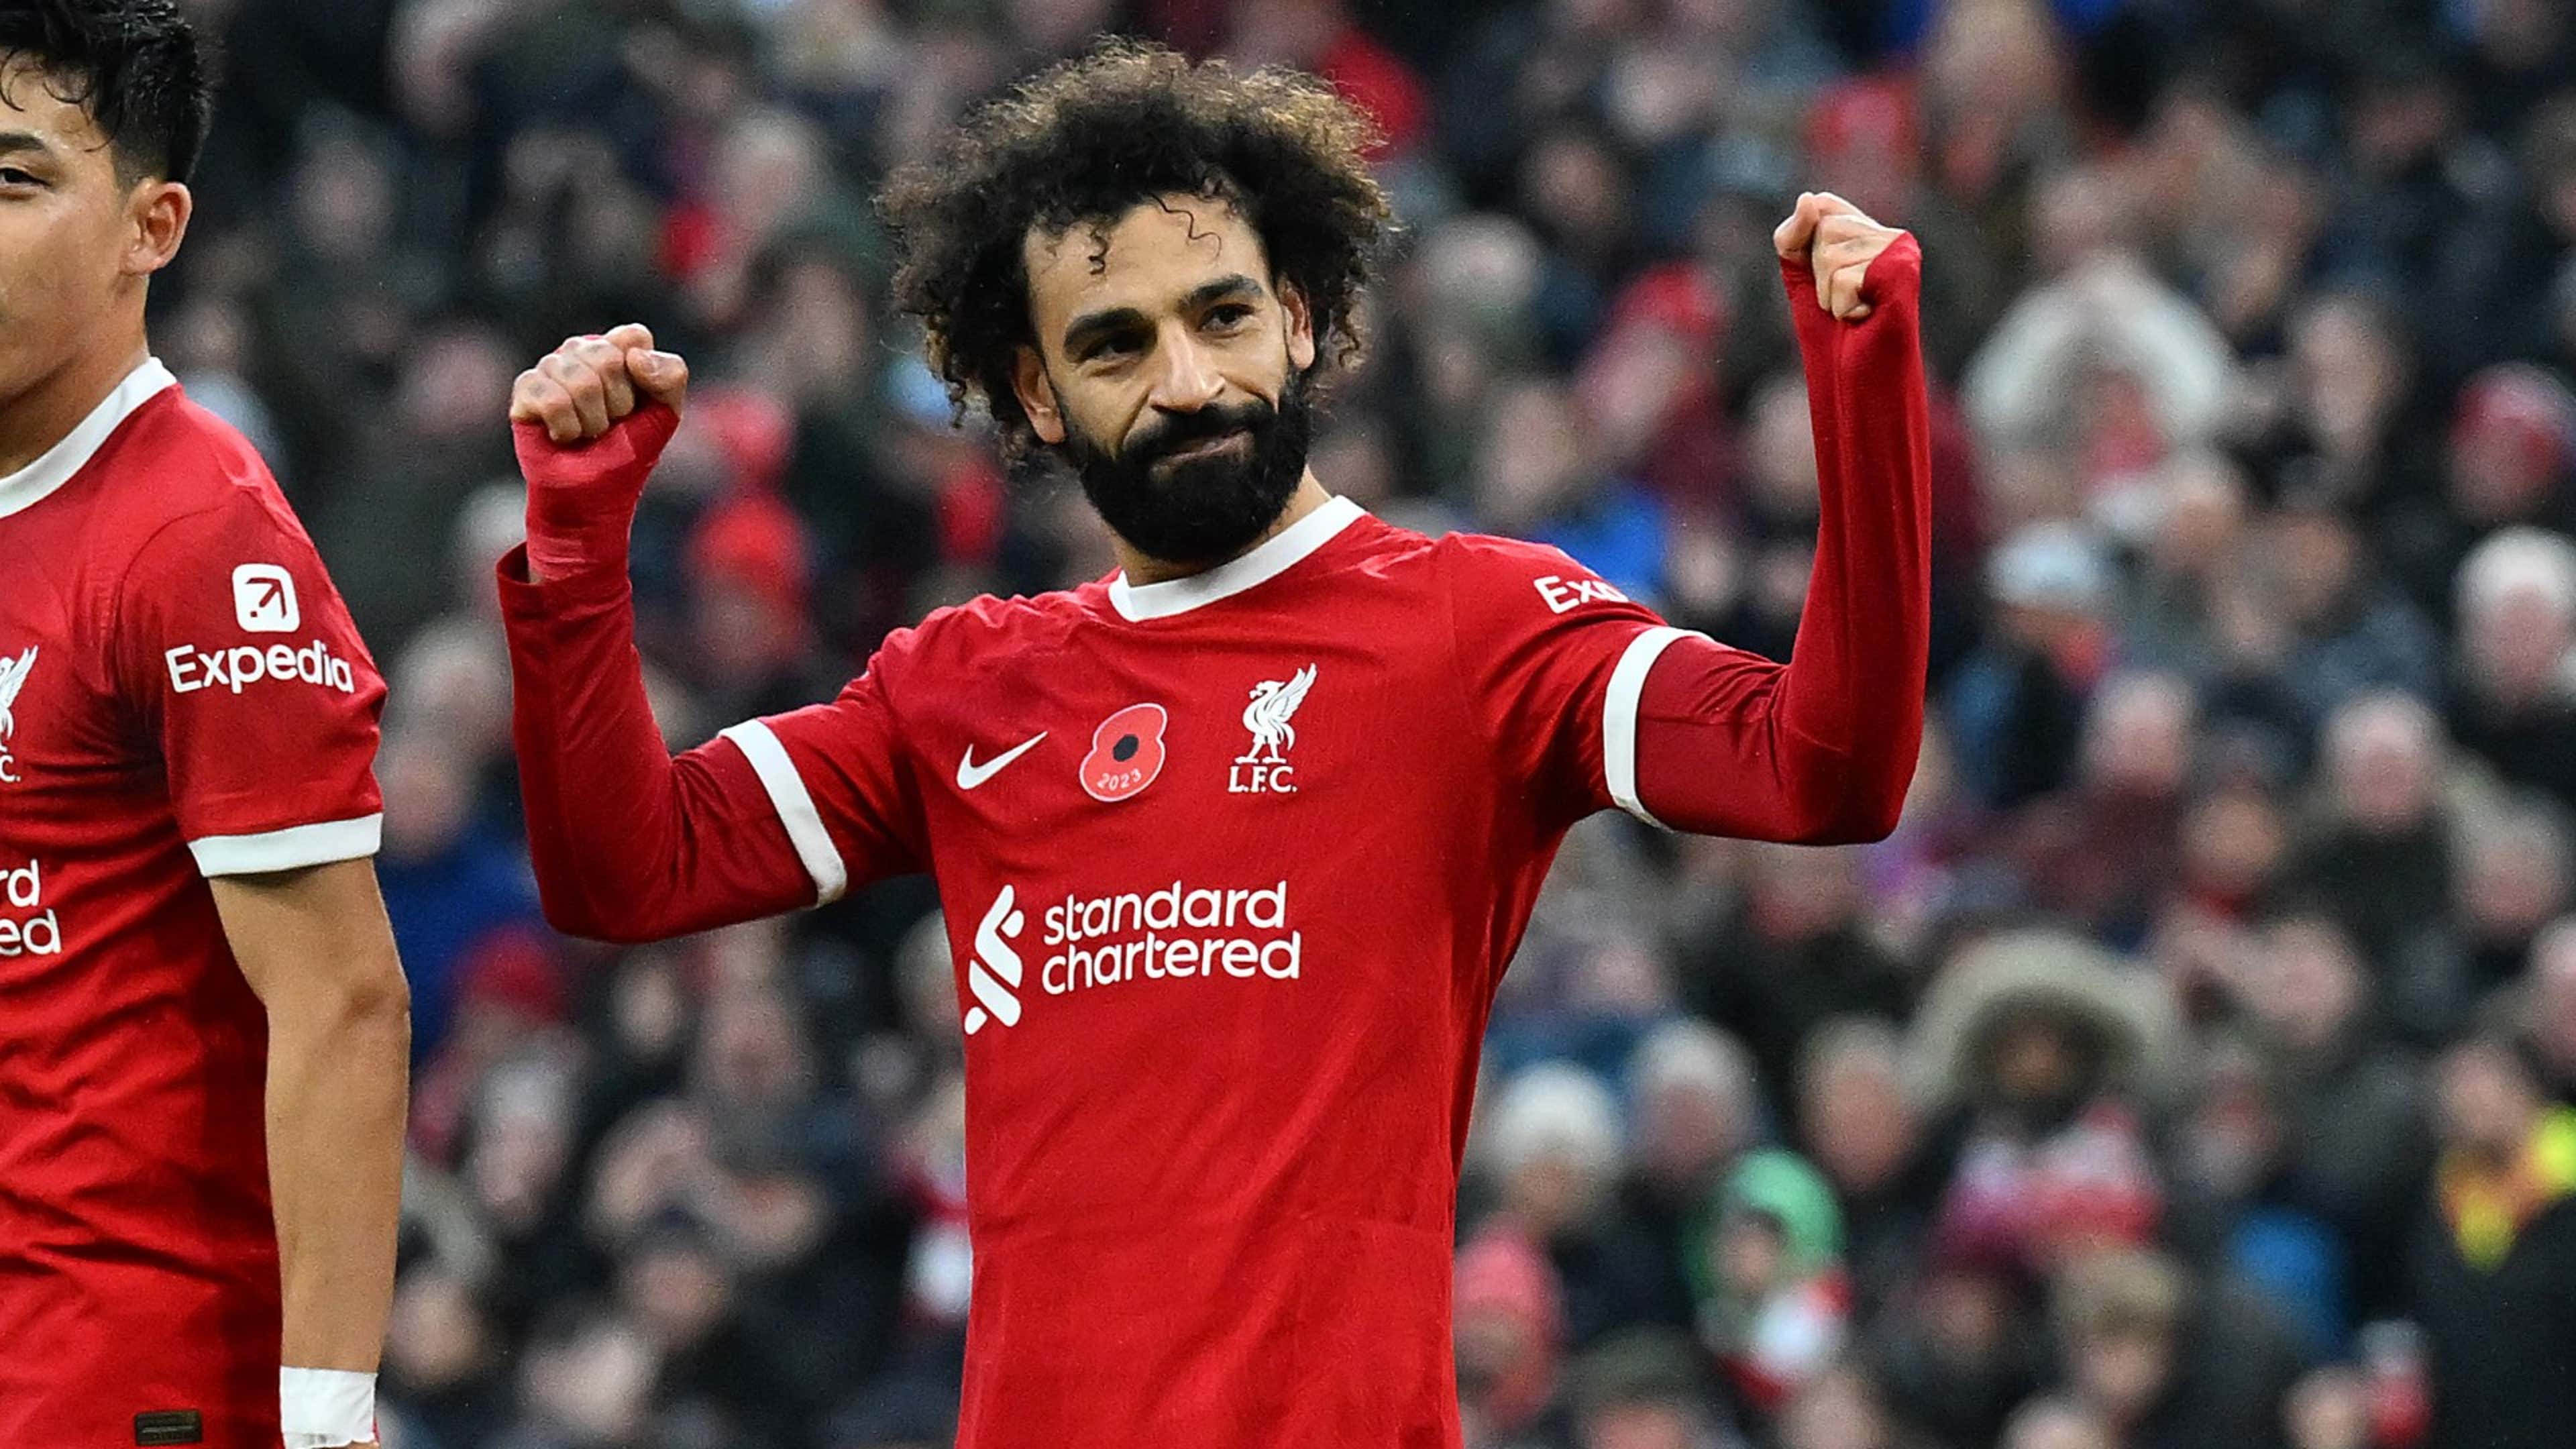 Second to nobody, is Liverpool superstar Mohamed Salah.